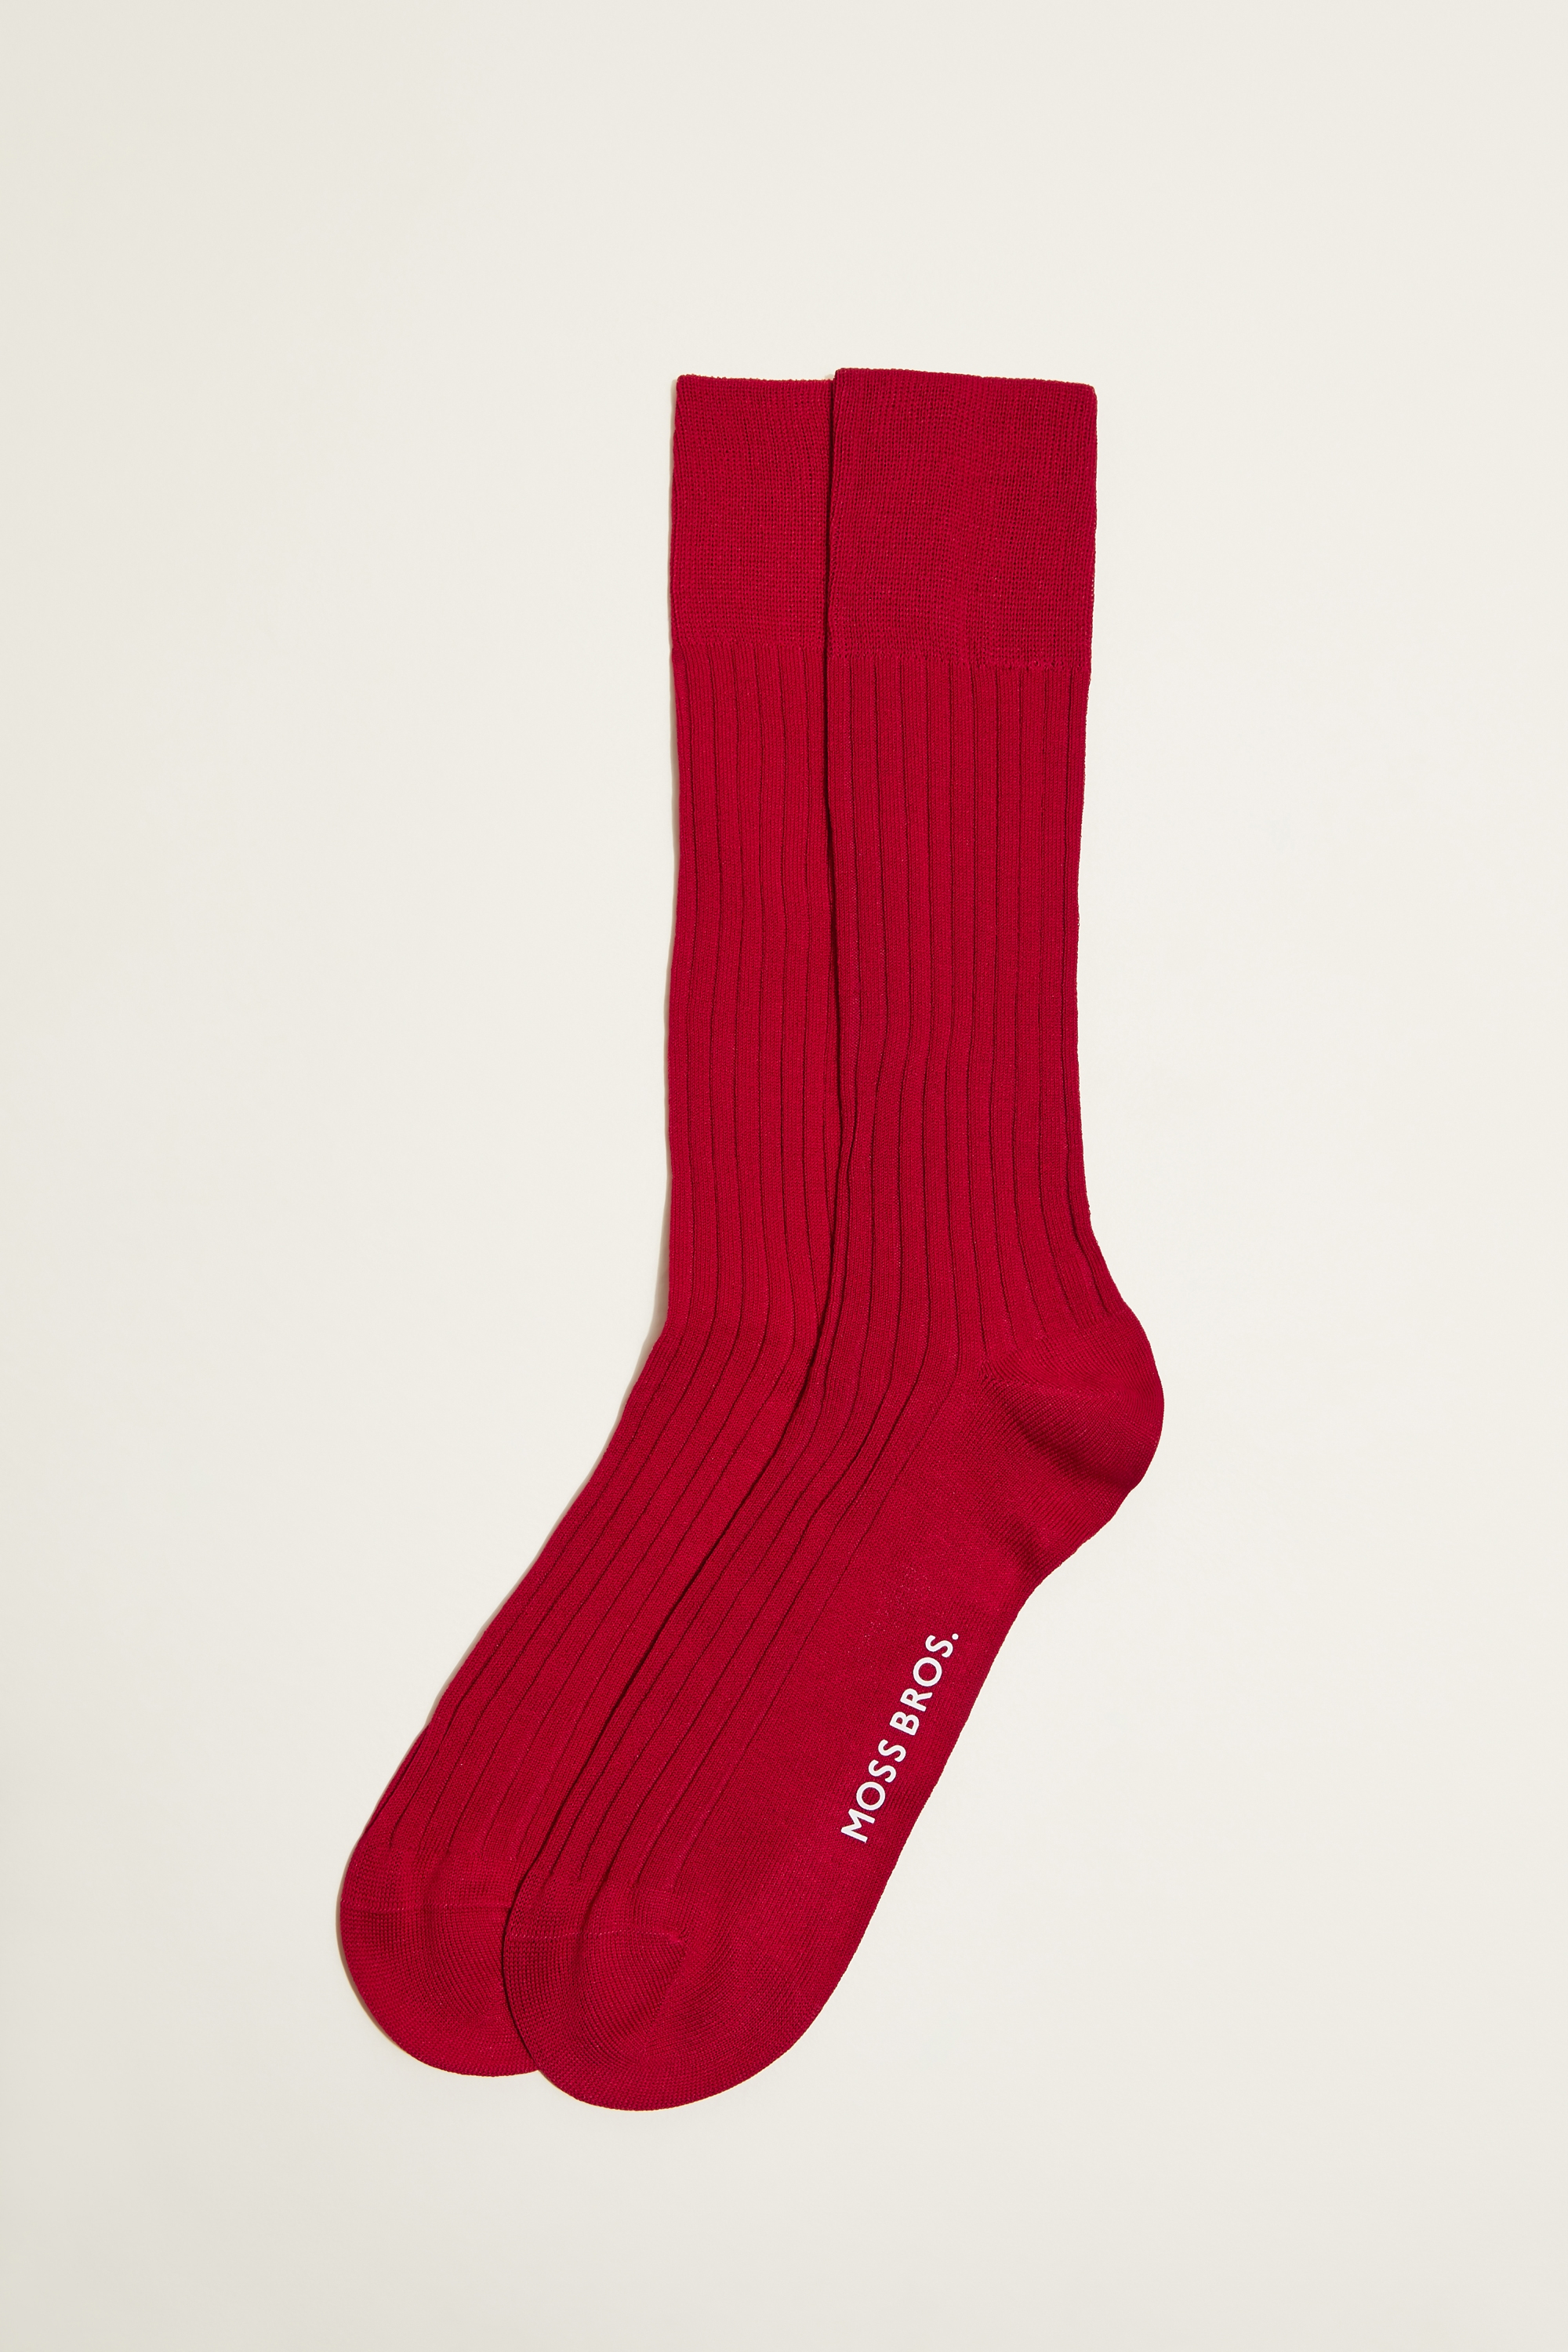 Moss 1851 Guards Red Fine Ribbed Sock